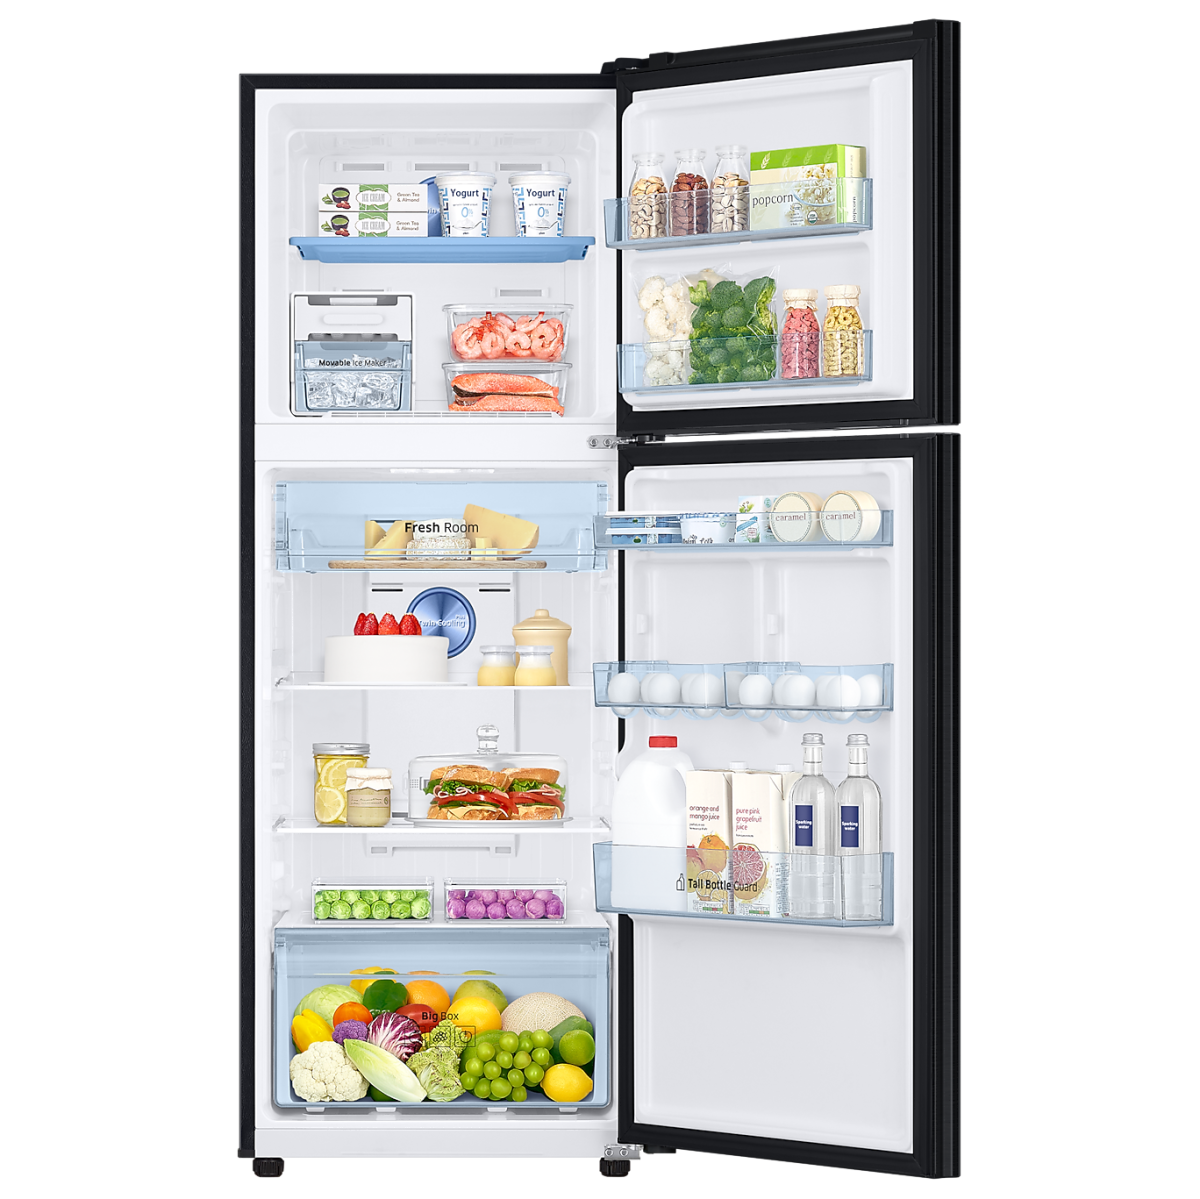 SAMSUNG 345 Liter Inverter Top Mount Refrigerator with 5 in 1 Convertible Mode RT37K5532BS/D3 Best Refrigerators of Year, Top-rated Refrigerators, Refrigerator Reviews, Refrigerator Comparison, Buying a Refrigerator Guide, Refrigerator Deals and Offers SAMSUNG 321 Liter Inverter Top Mount Refrigerator with 5 in 1 Convertible Mode RT34K5532BS/D3,Best Refrigerators of Year, Top-rated Refrigerators, Refrigerator Reviews, Refrigerator Comparison, Buying a Refrigerator Guide, Refrigerator Deals and Offers